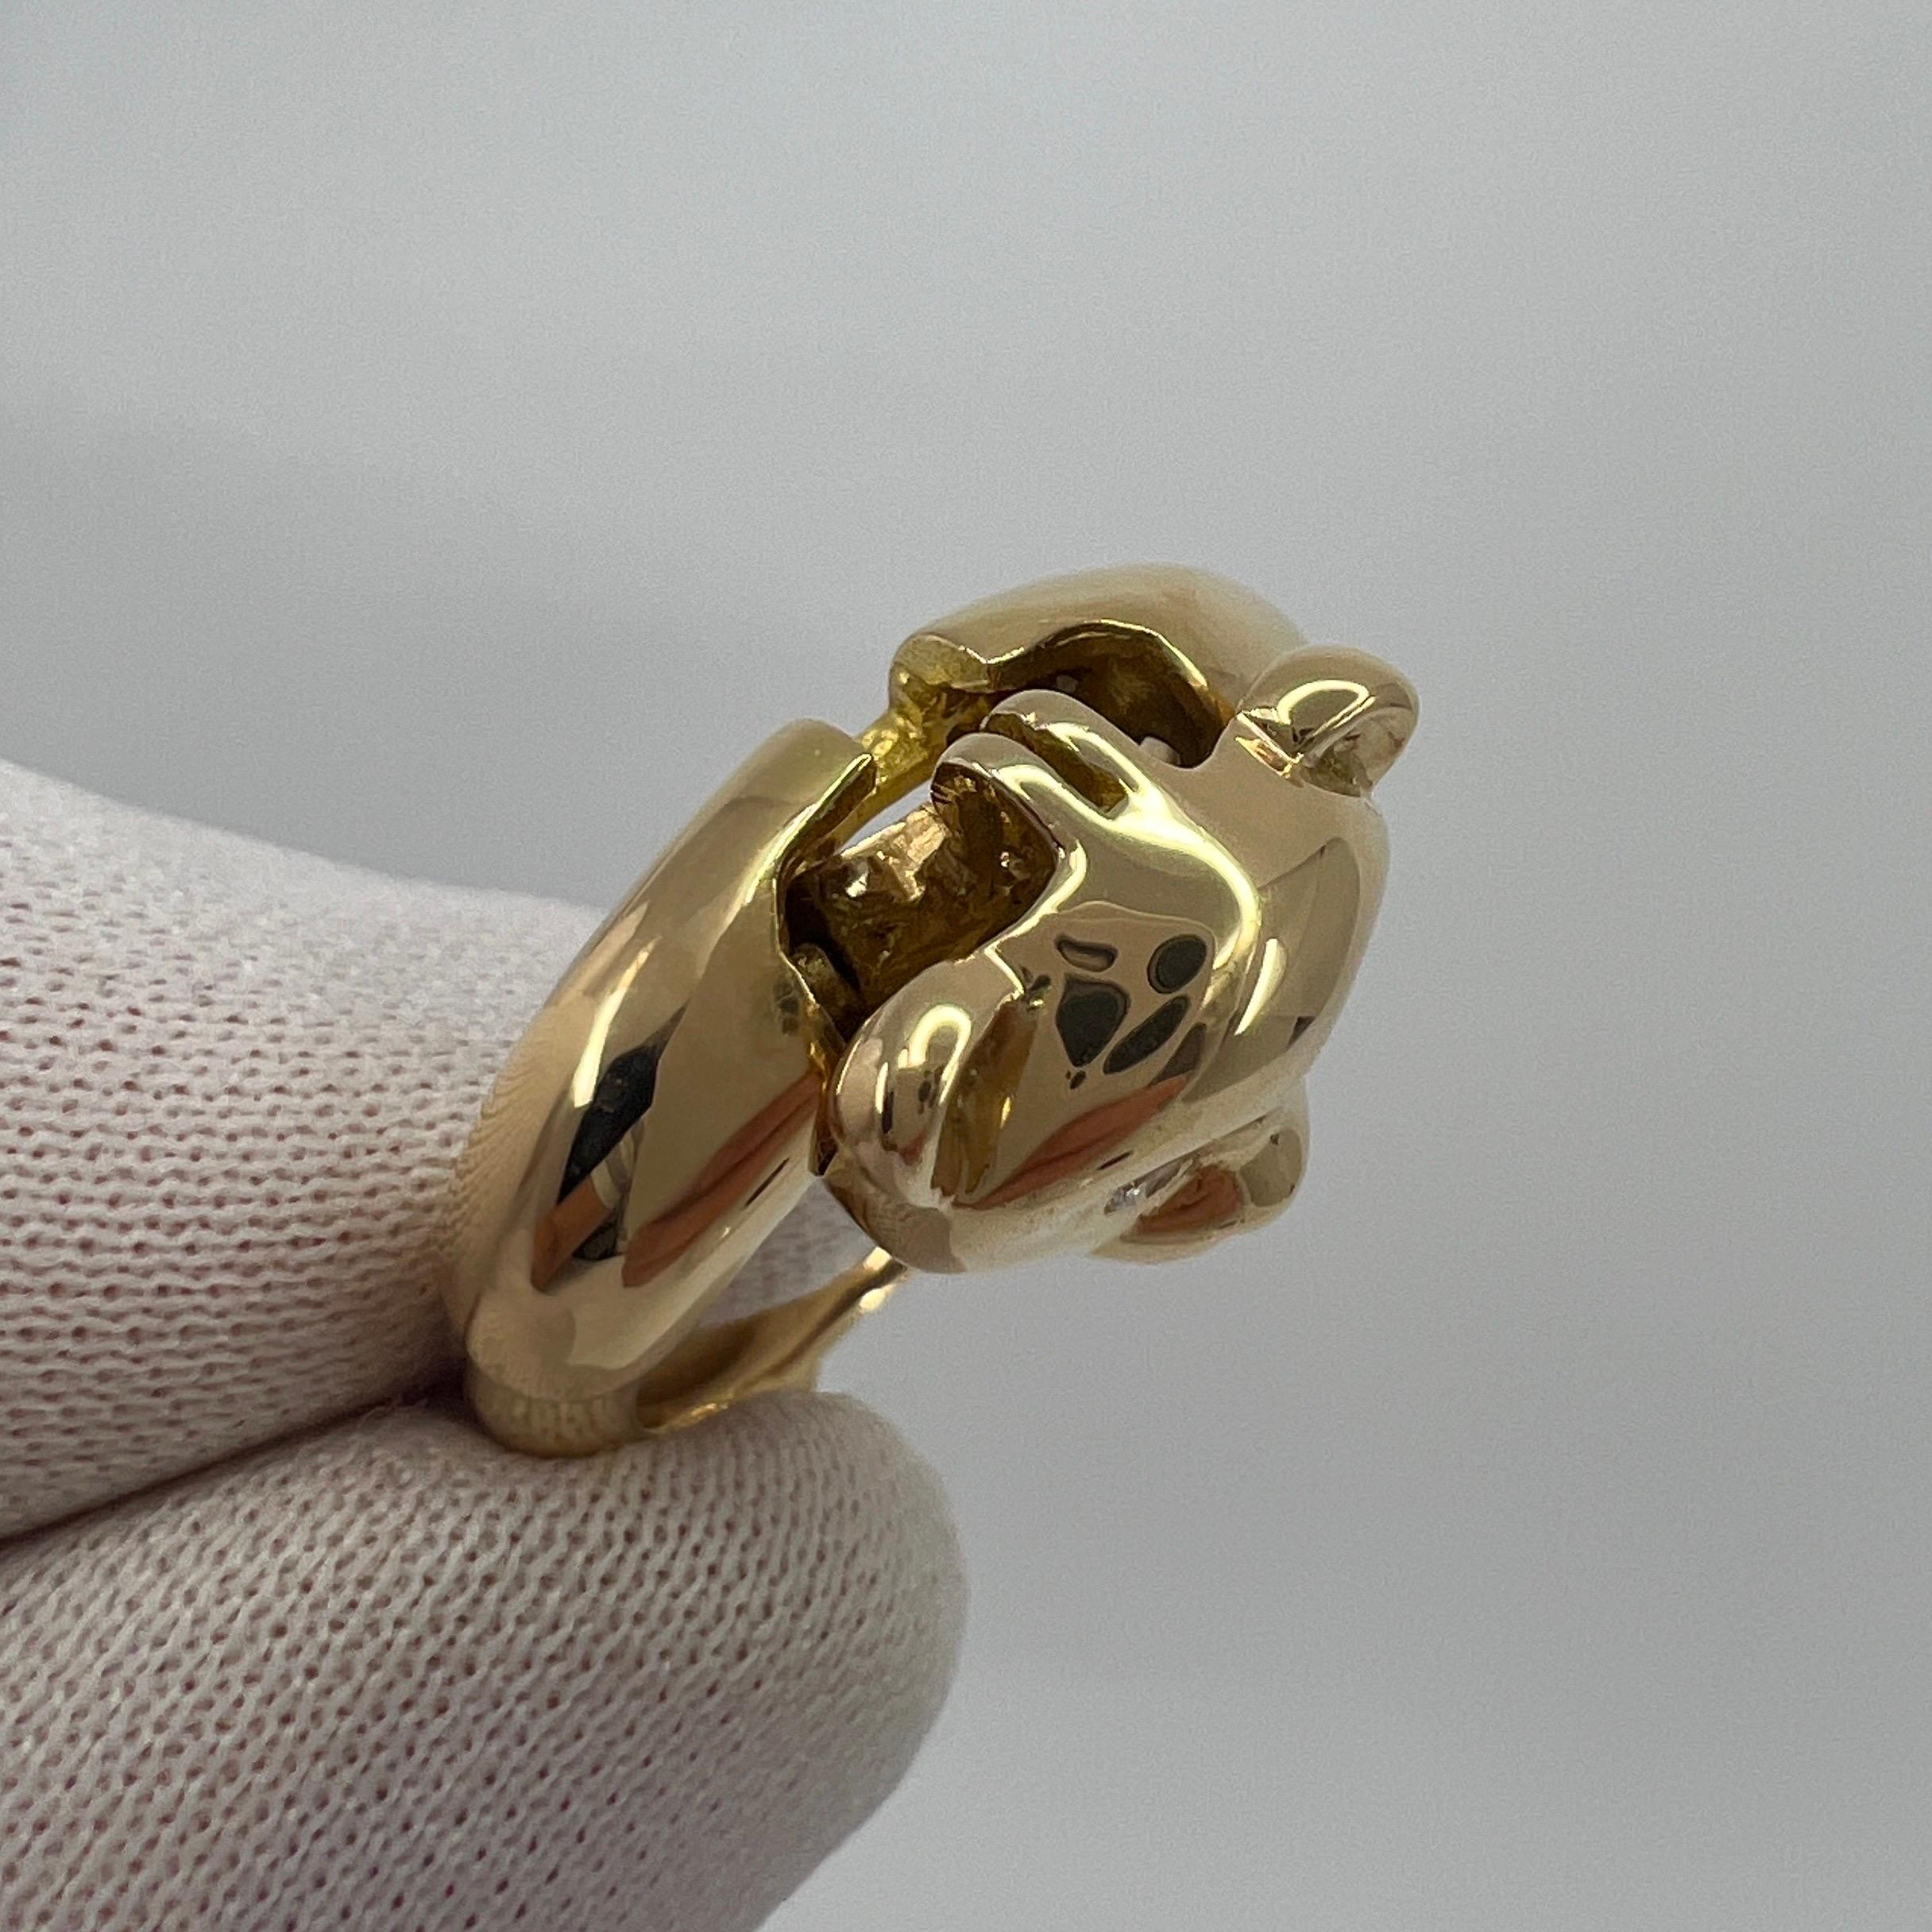 Round Cut Very Rare Vintage Van Cleef & Arpels 18k Yellow Gold Teddy Bear Ring and Pendant